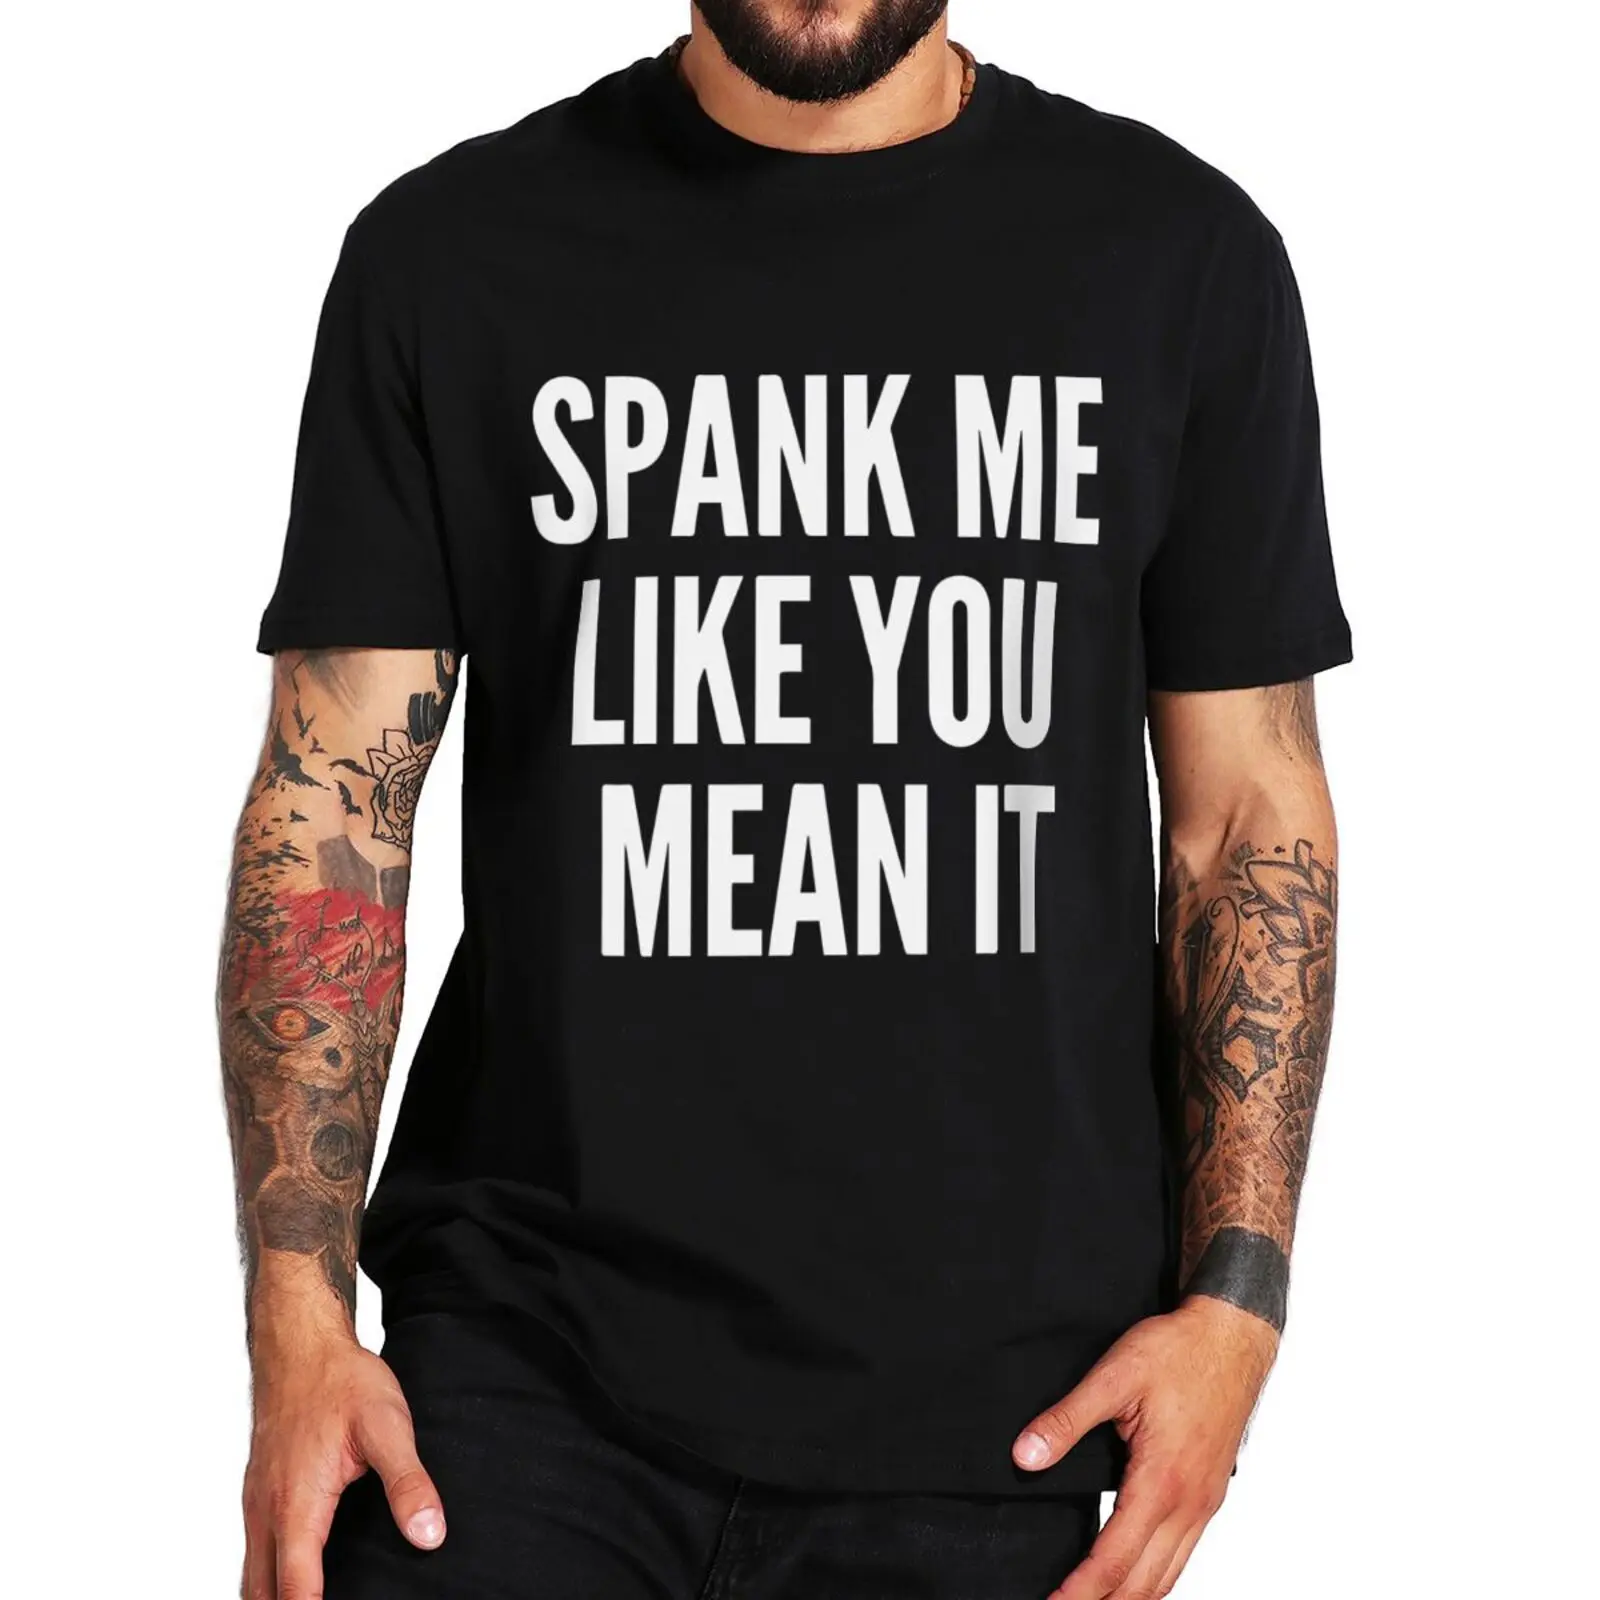 

Spank Me Like You Mean It T Shirt Funny Adult Jokes Humor DDLG Camiseta 100% Cotton Summer Unisex Casual Oversized T-shirts